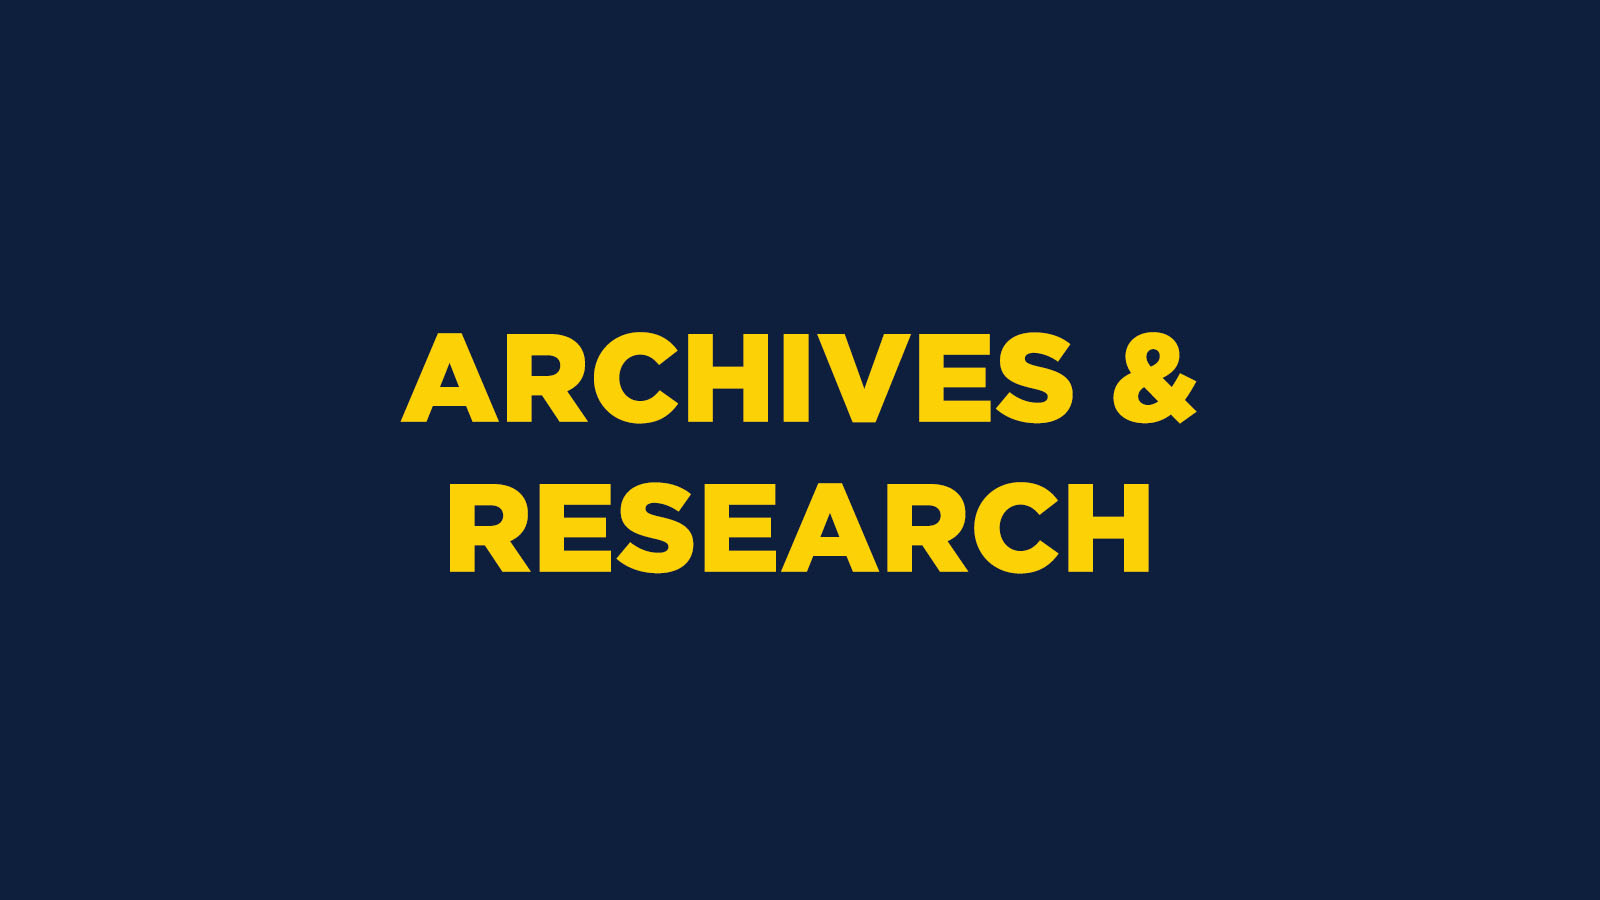 Archives & Research